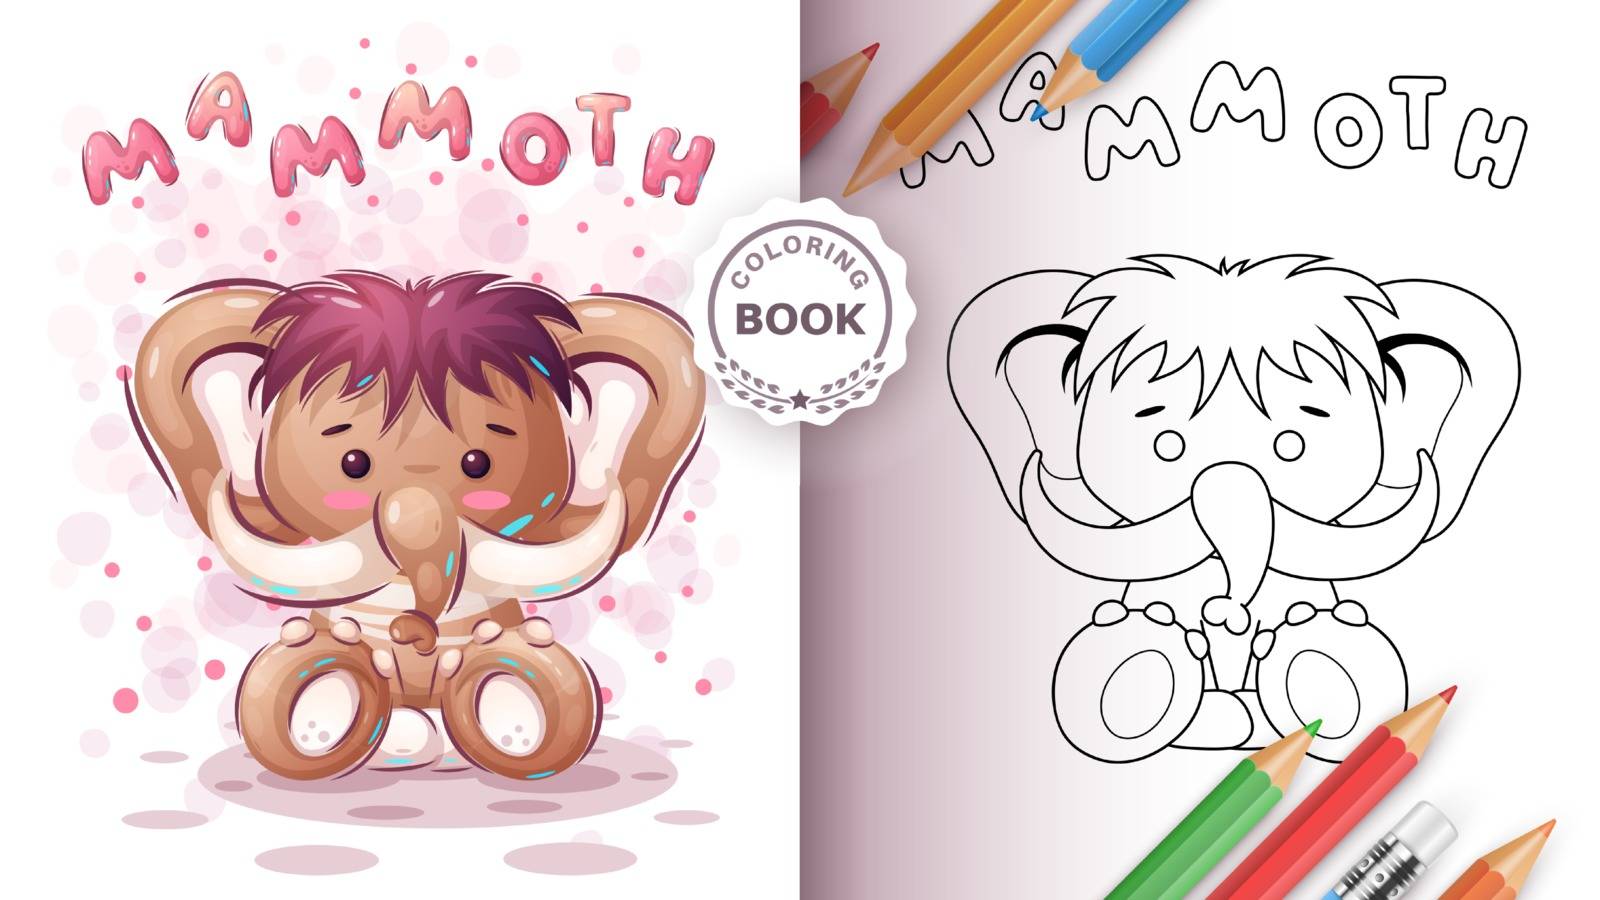 Teddy mammoth - coloring book for kind and children. Vector eps 10